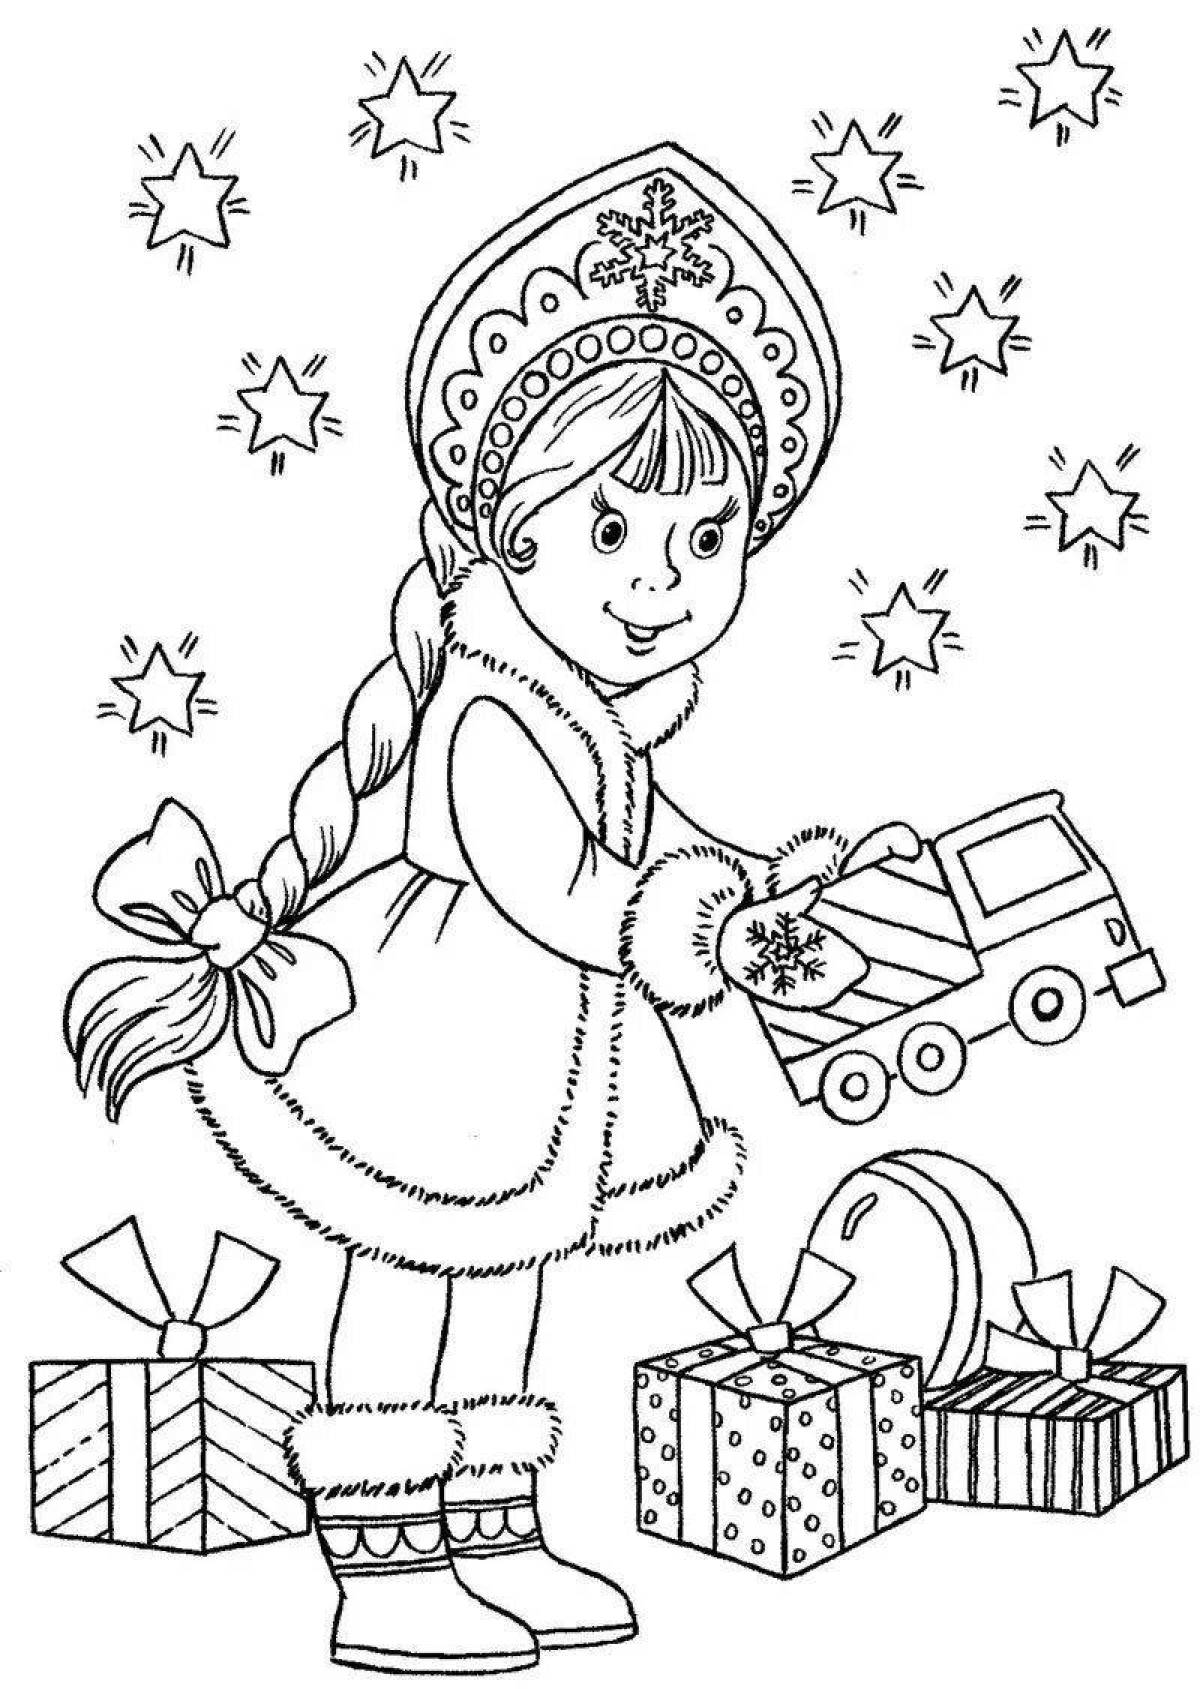 Joyful coloring of the snow maiden for children